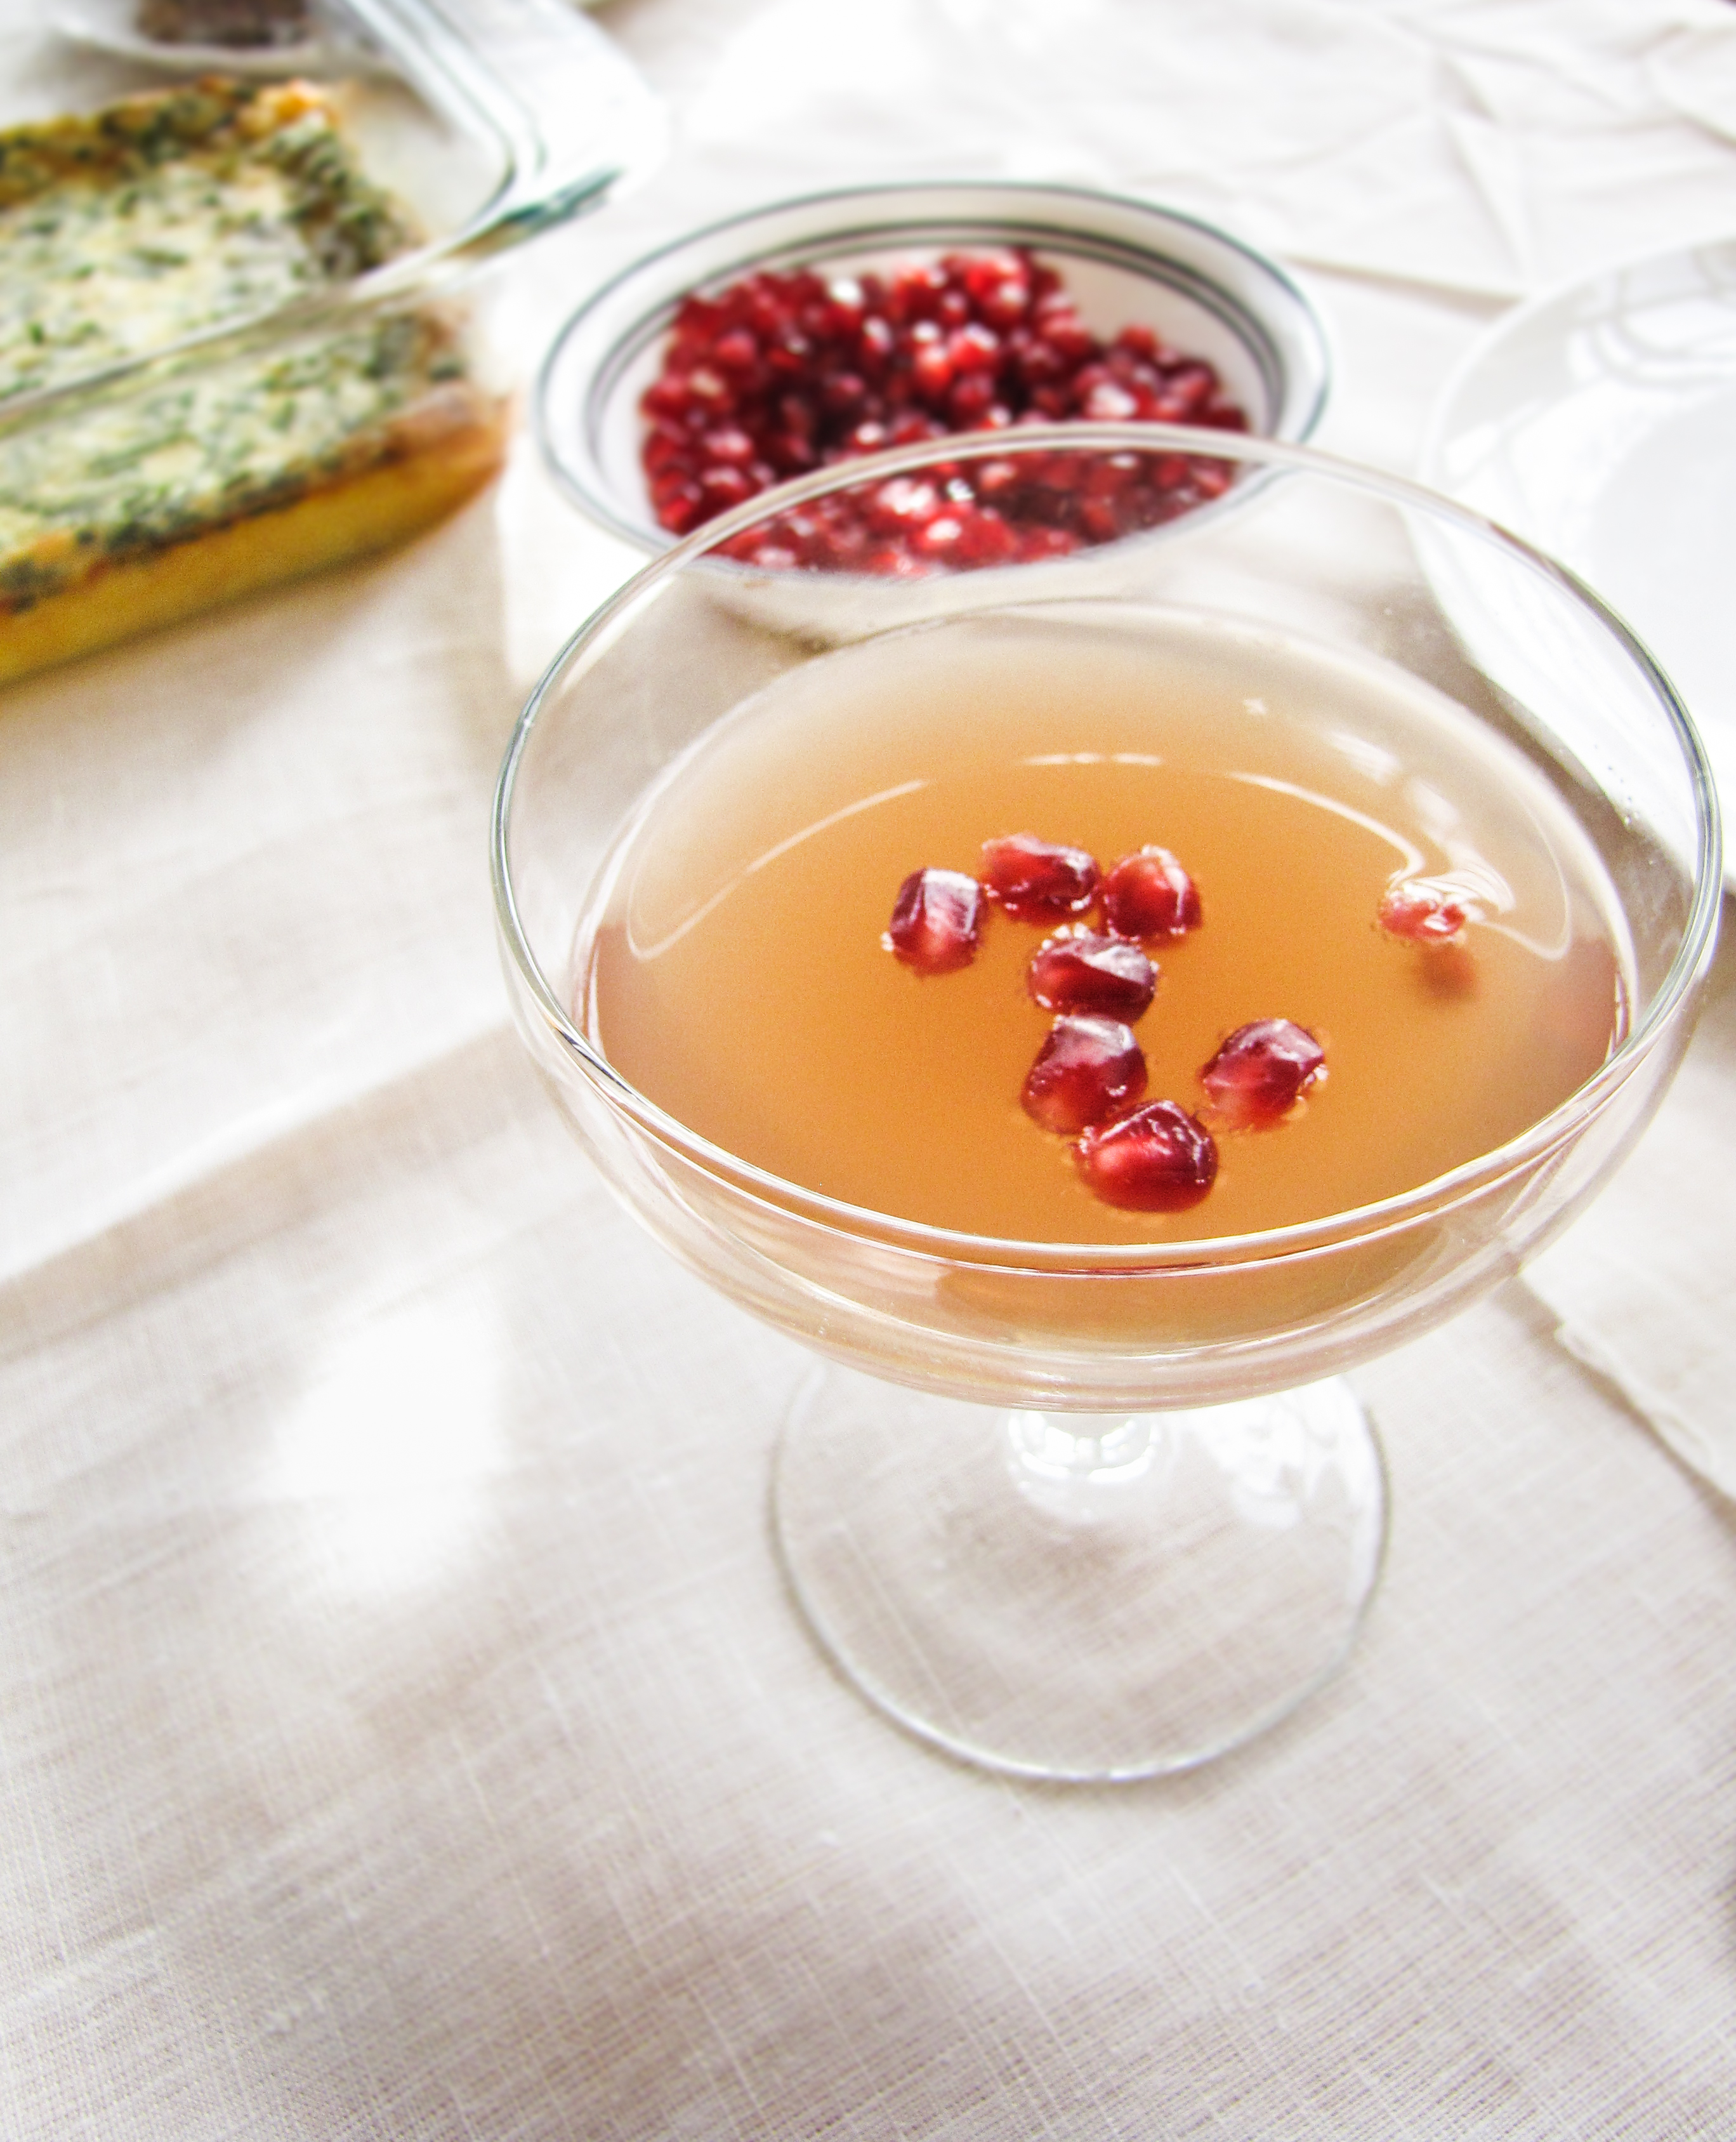 12 Festive Winter Cocktails  - Pomegranate Mimosas for Christmas Morning {Katie at the Kitchen Door}